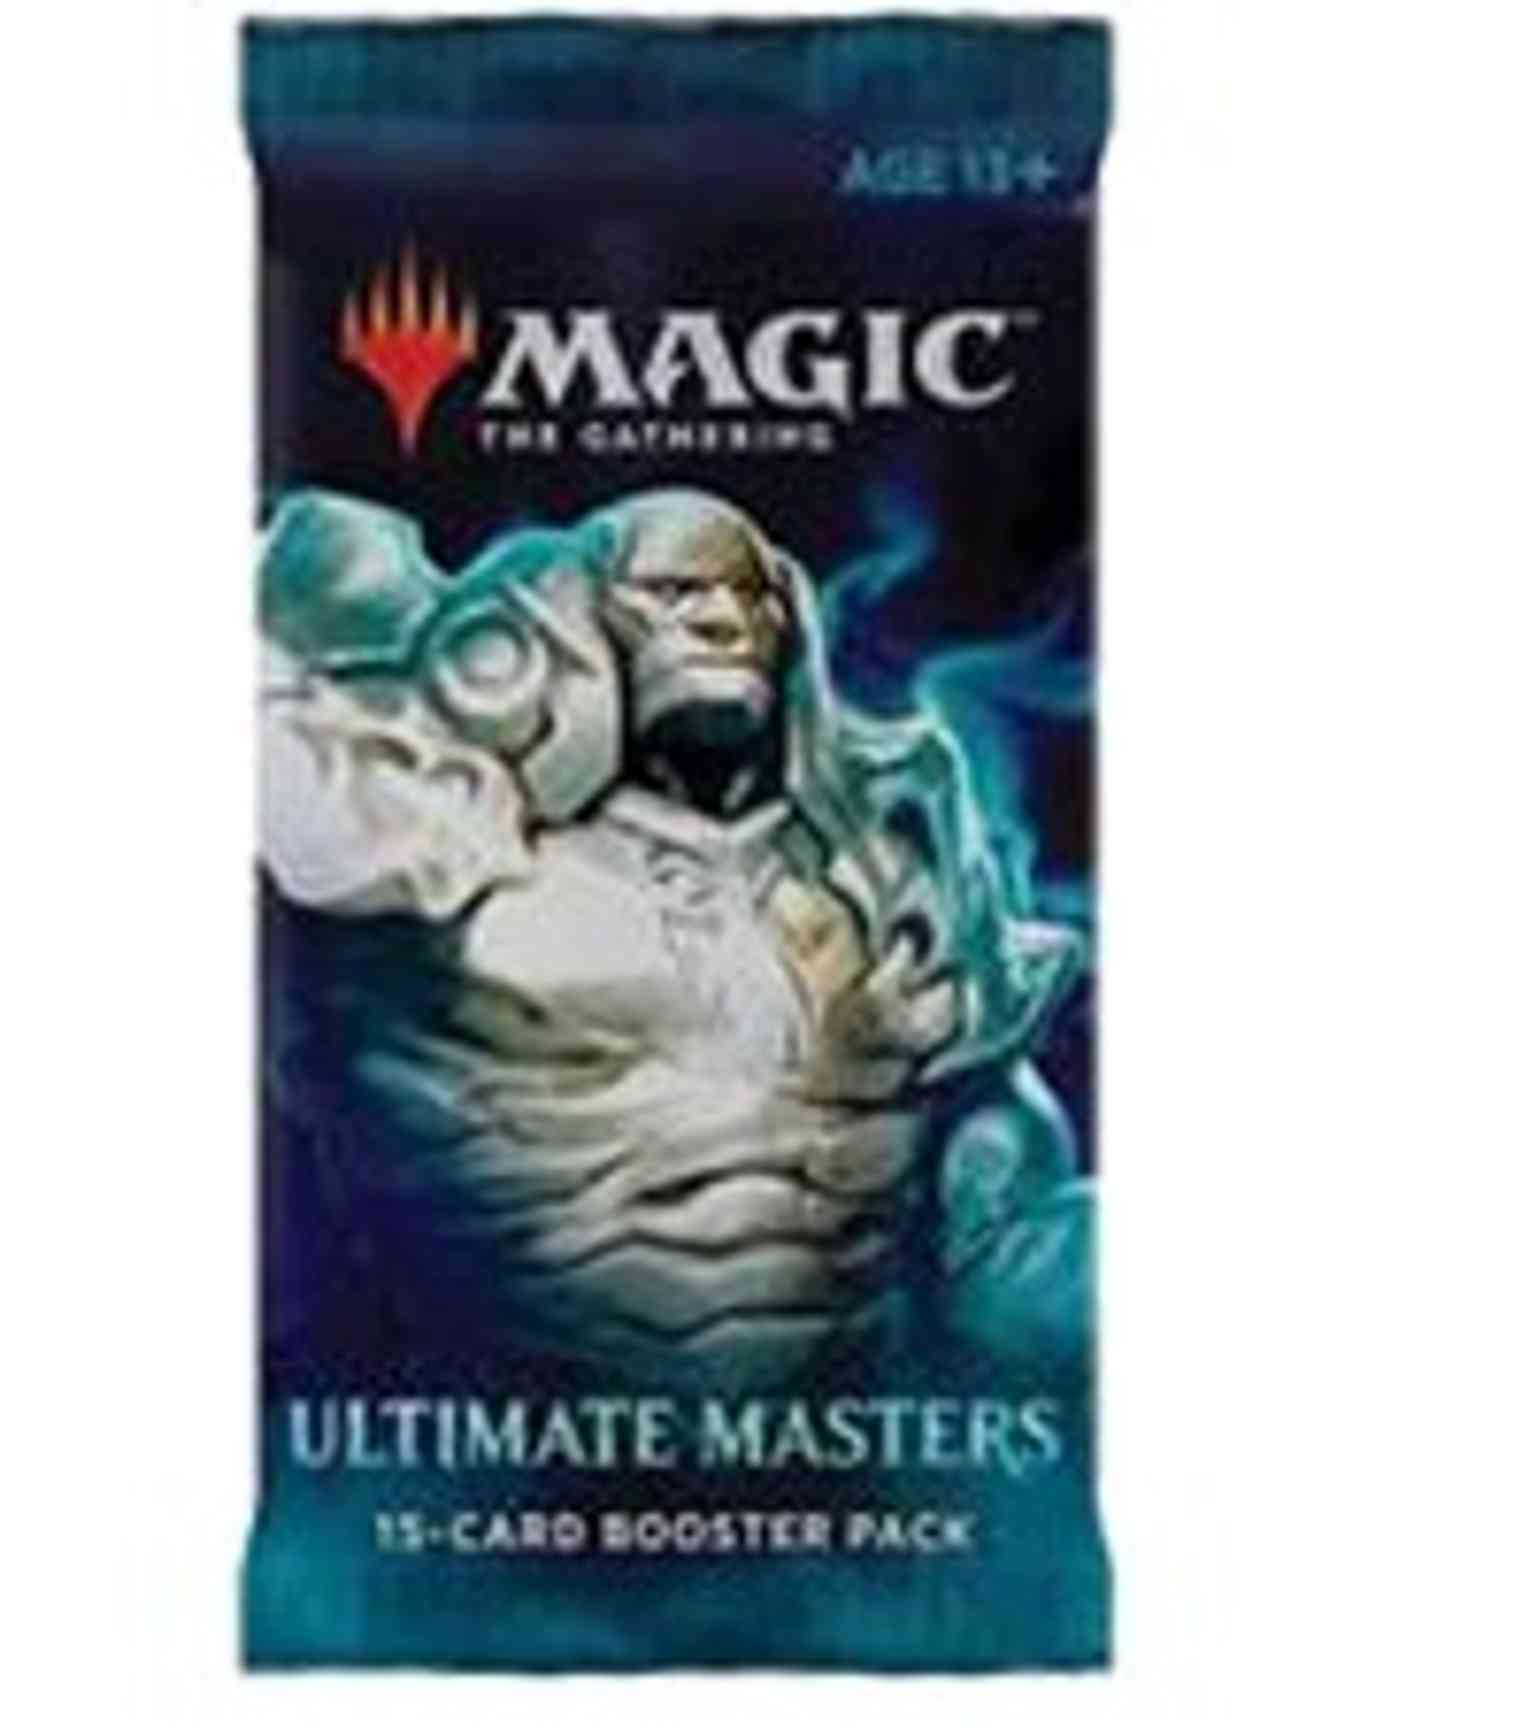 Ultimate Masters - Booster Pack magic card front